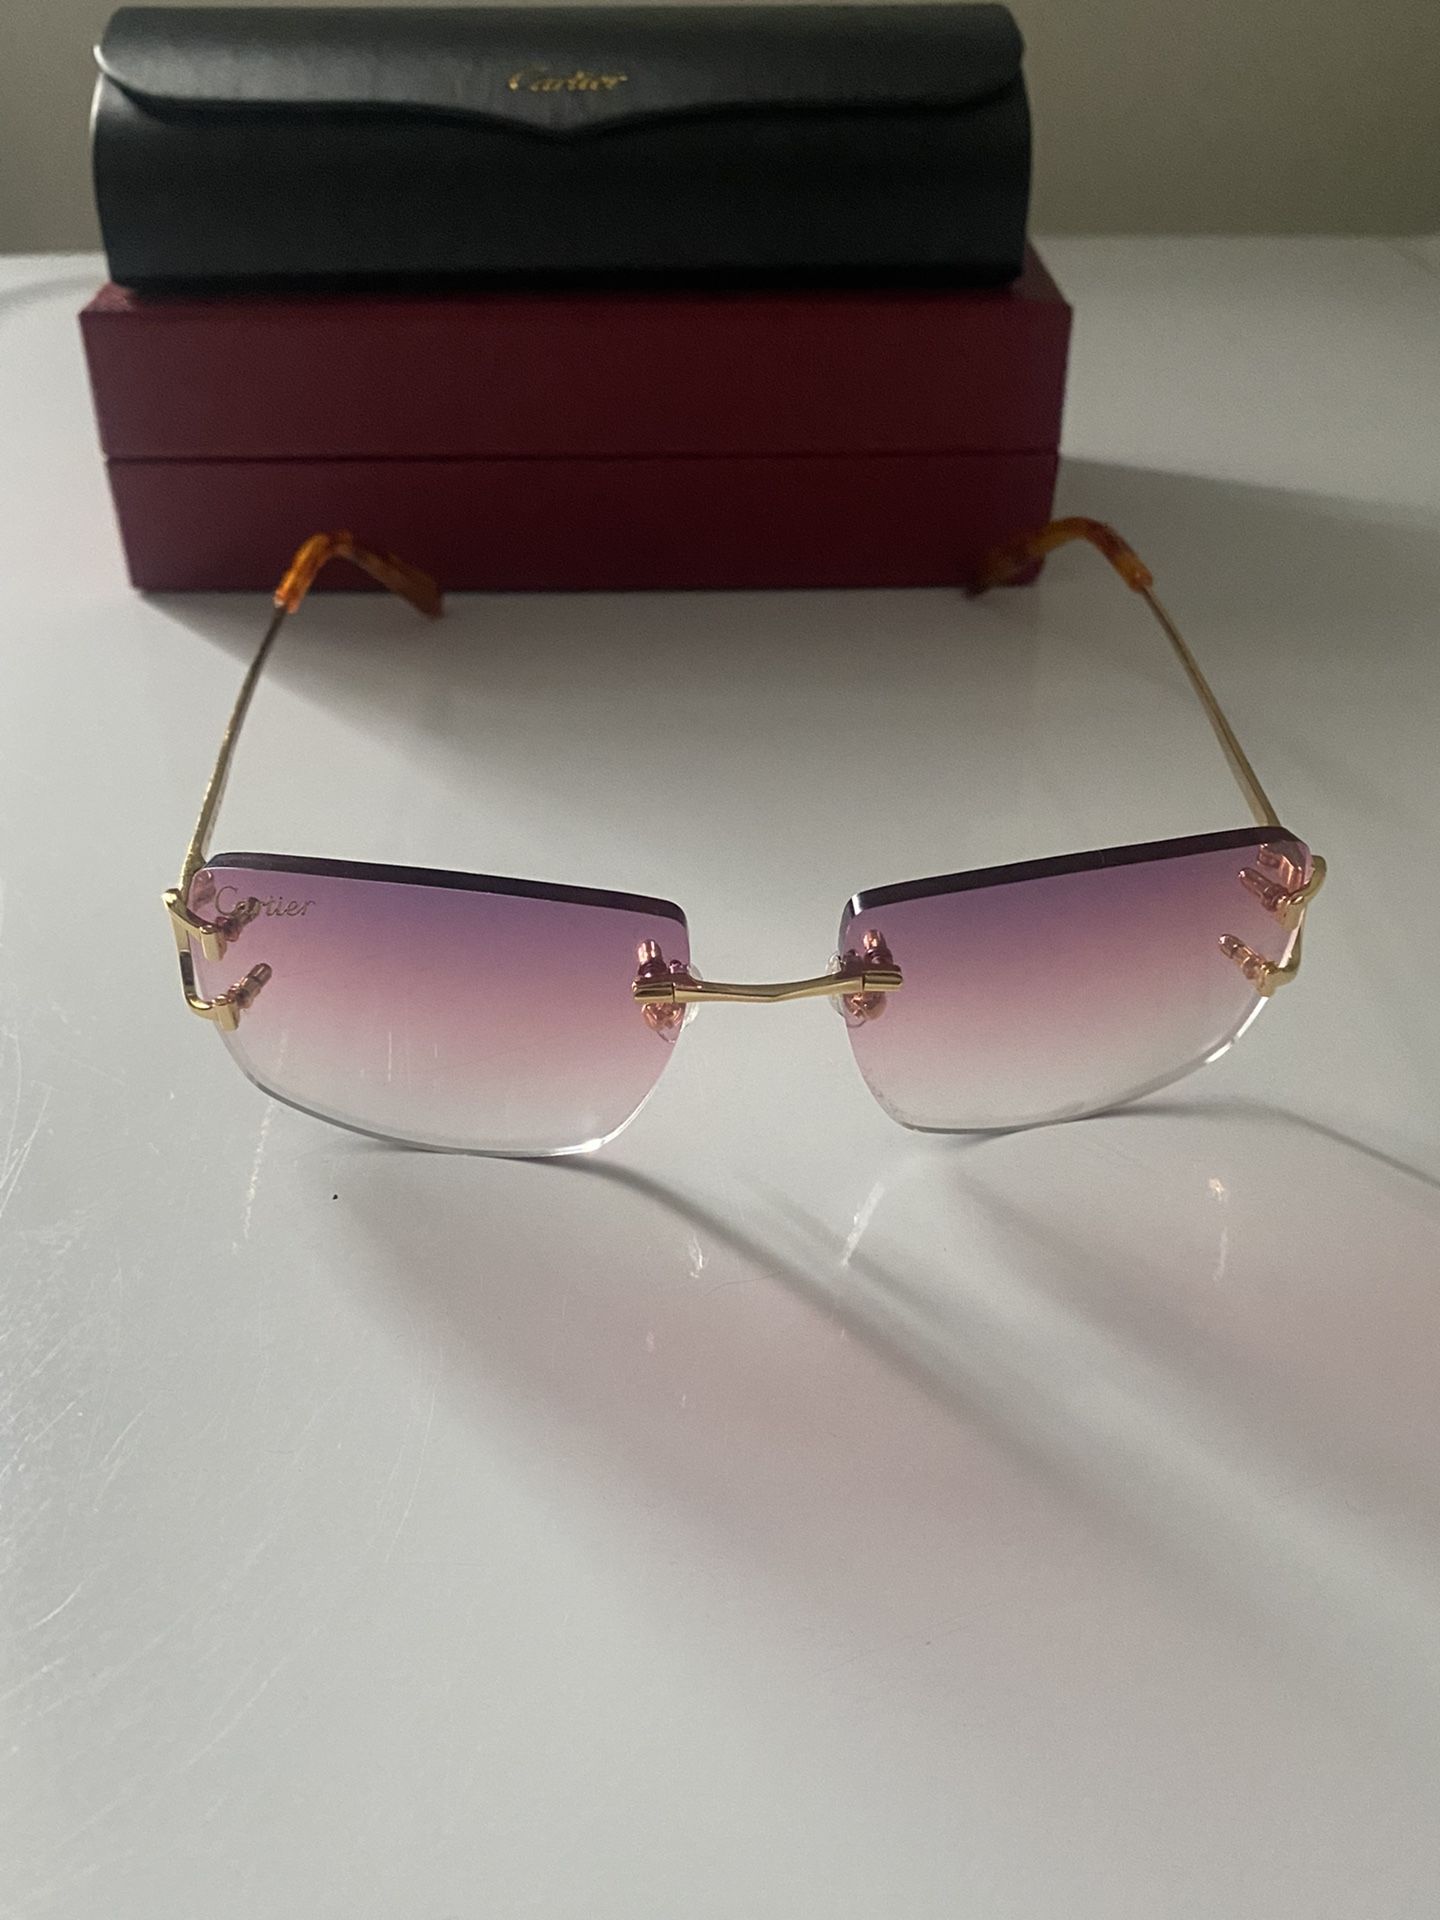 Cartier Heart Sale Brown Gradient Sunglasses for Sale in Baltimore, MD -  OfferUp